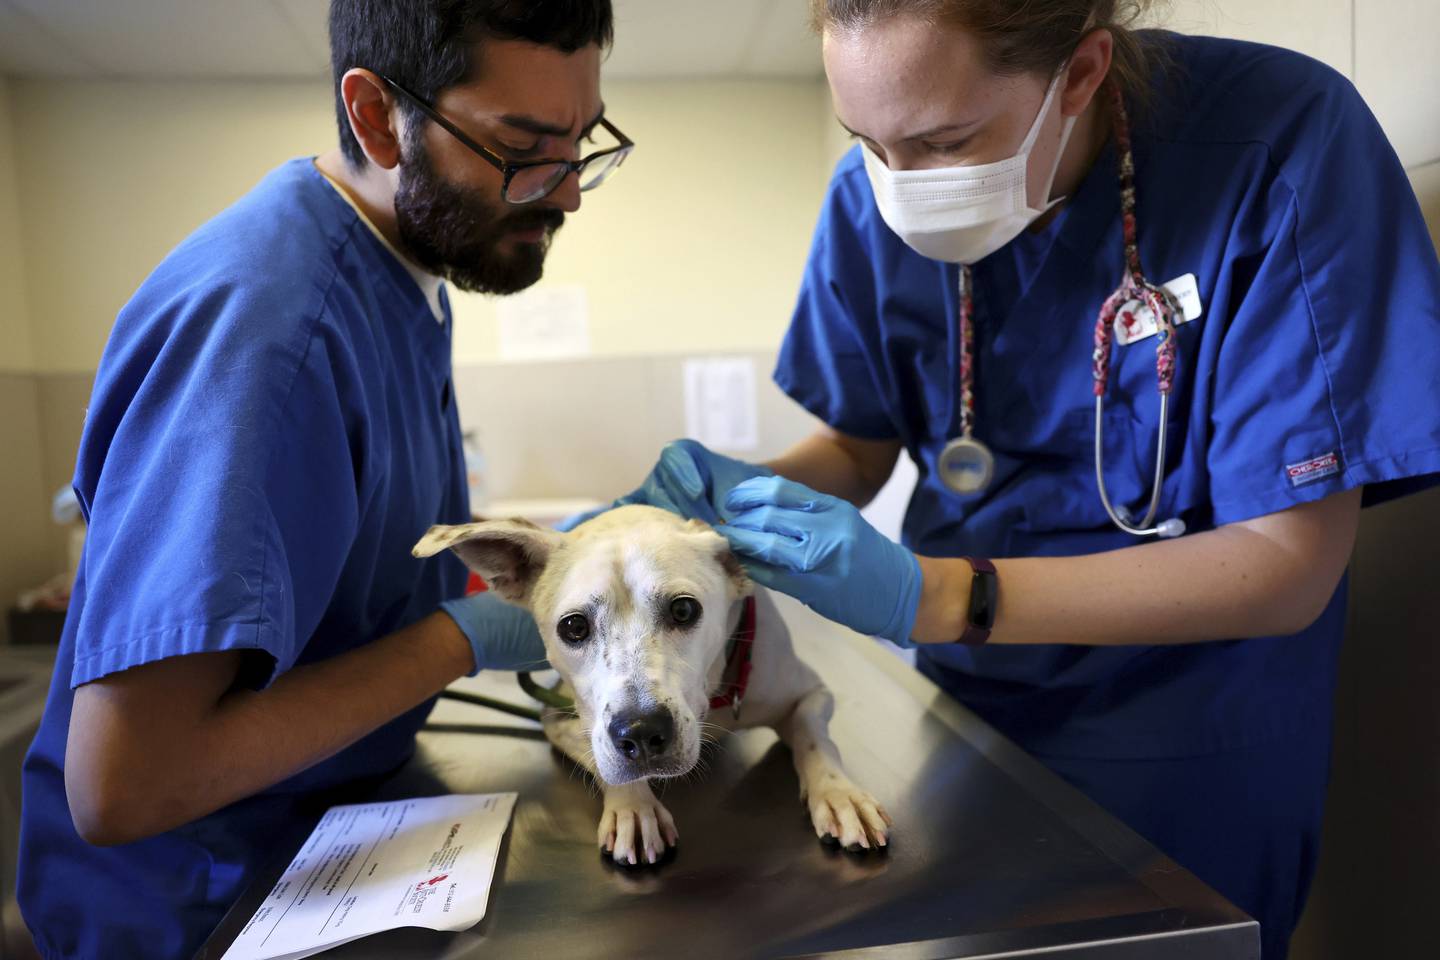 Vet tech Alex Zegarra and Anti-Cruelty Society medical director Emily Swiniarski complete a well being check up on Joe the dog as animals arrived in Chicago from a bus traveling in from Furry Friends shelter in Jupiter, Florida.